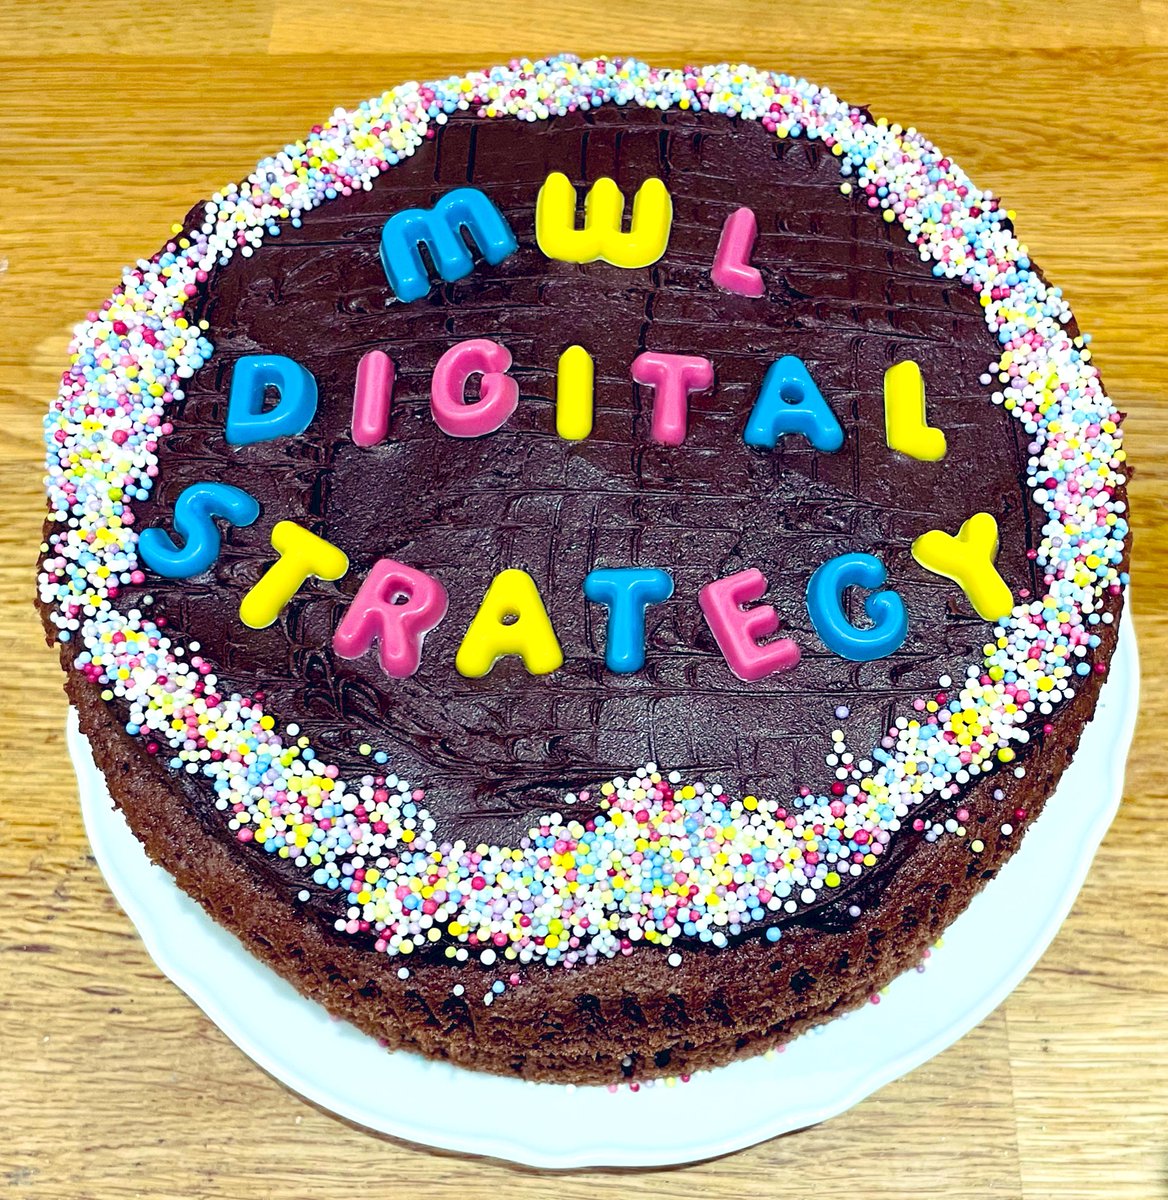 Digital Strategy cake ready to go! 
See you all the stall later 👋 
#WhatMattersToYou
#Collaboration
#Vision 
#DigitalStrategy